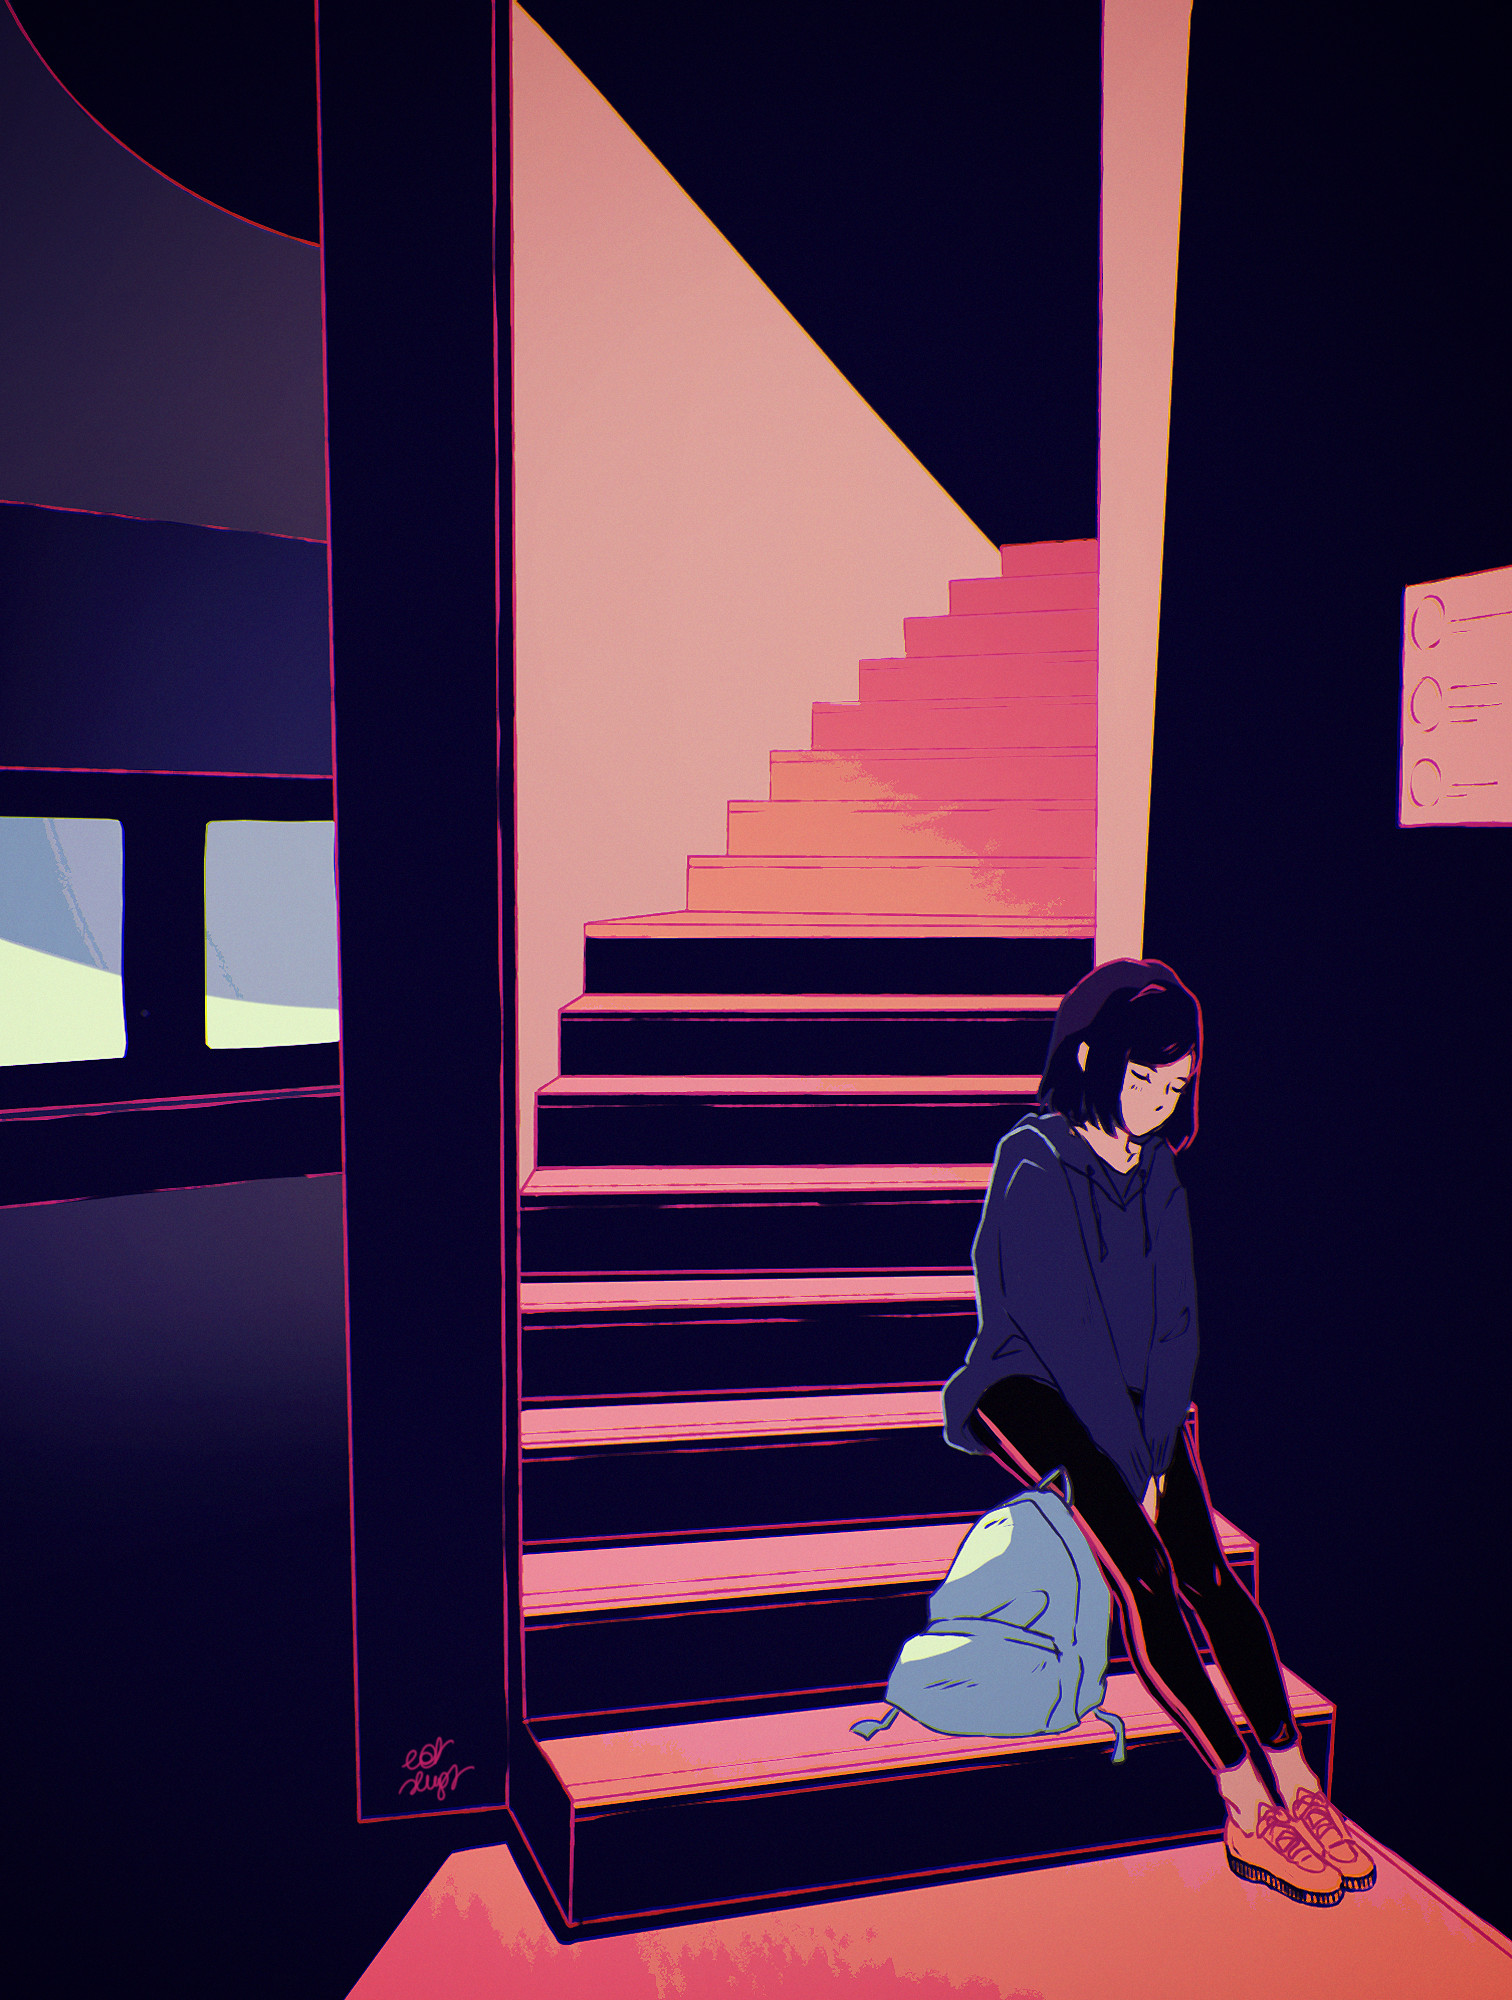 art, sadness, girl, loneliness, sorrow, vector, stairs, ladder